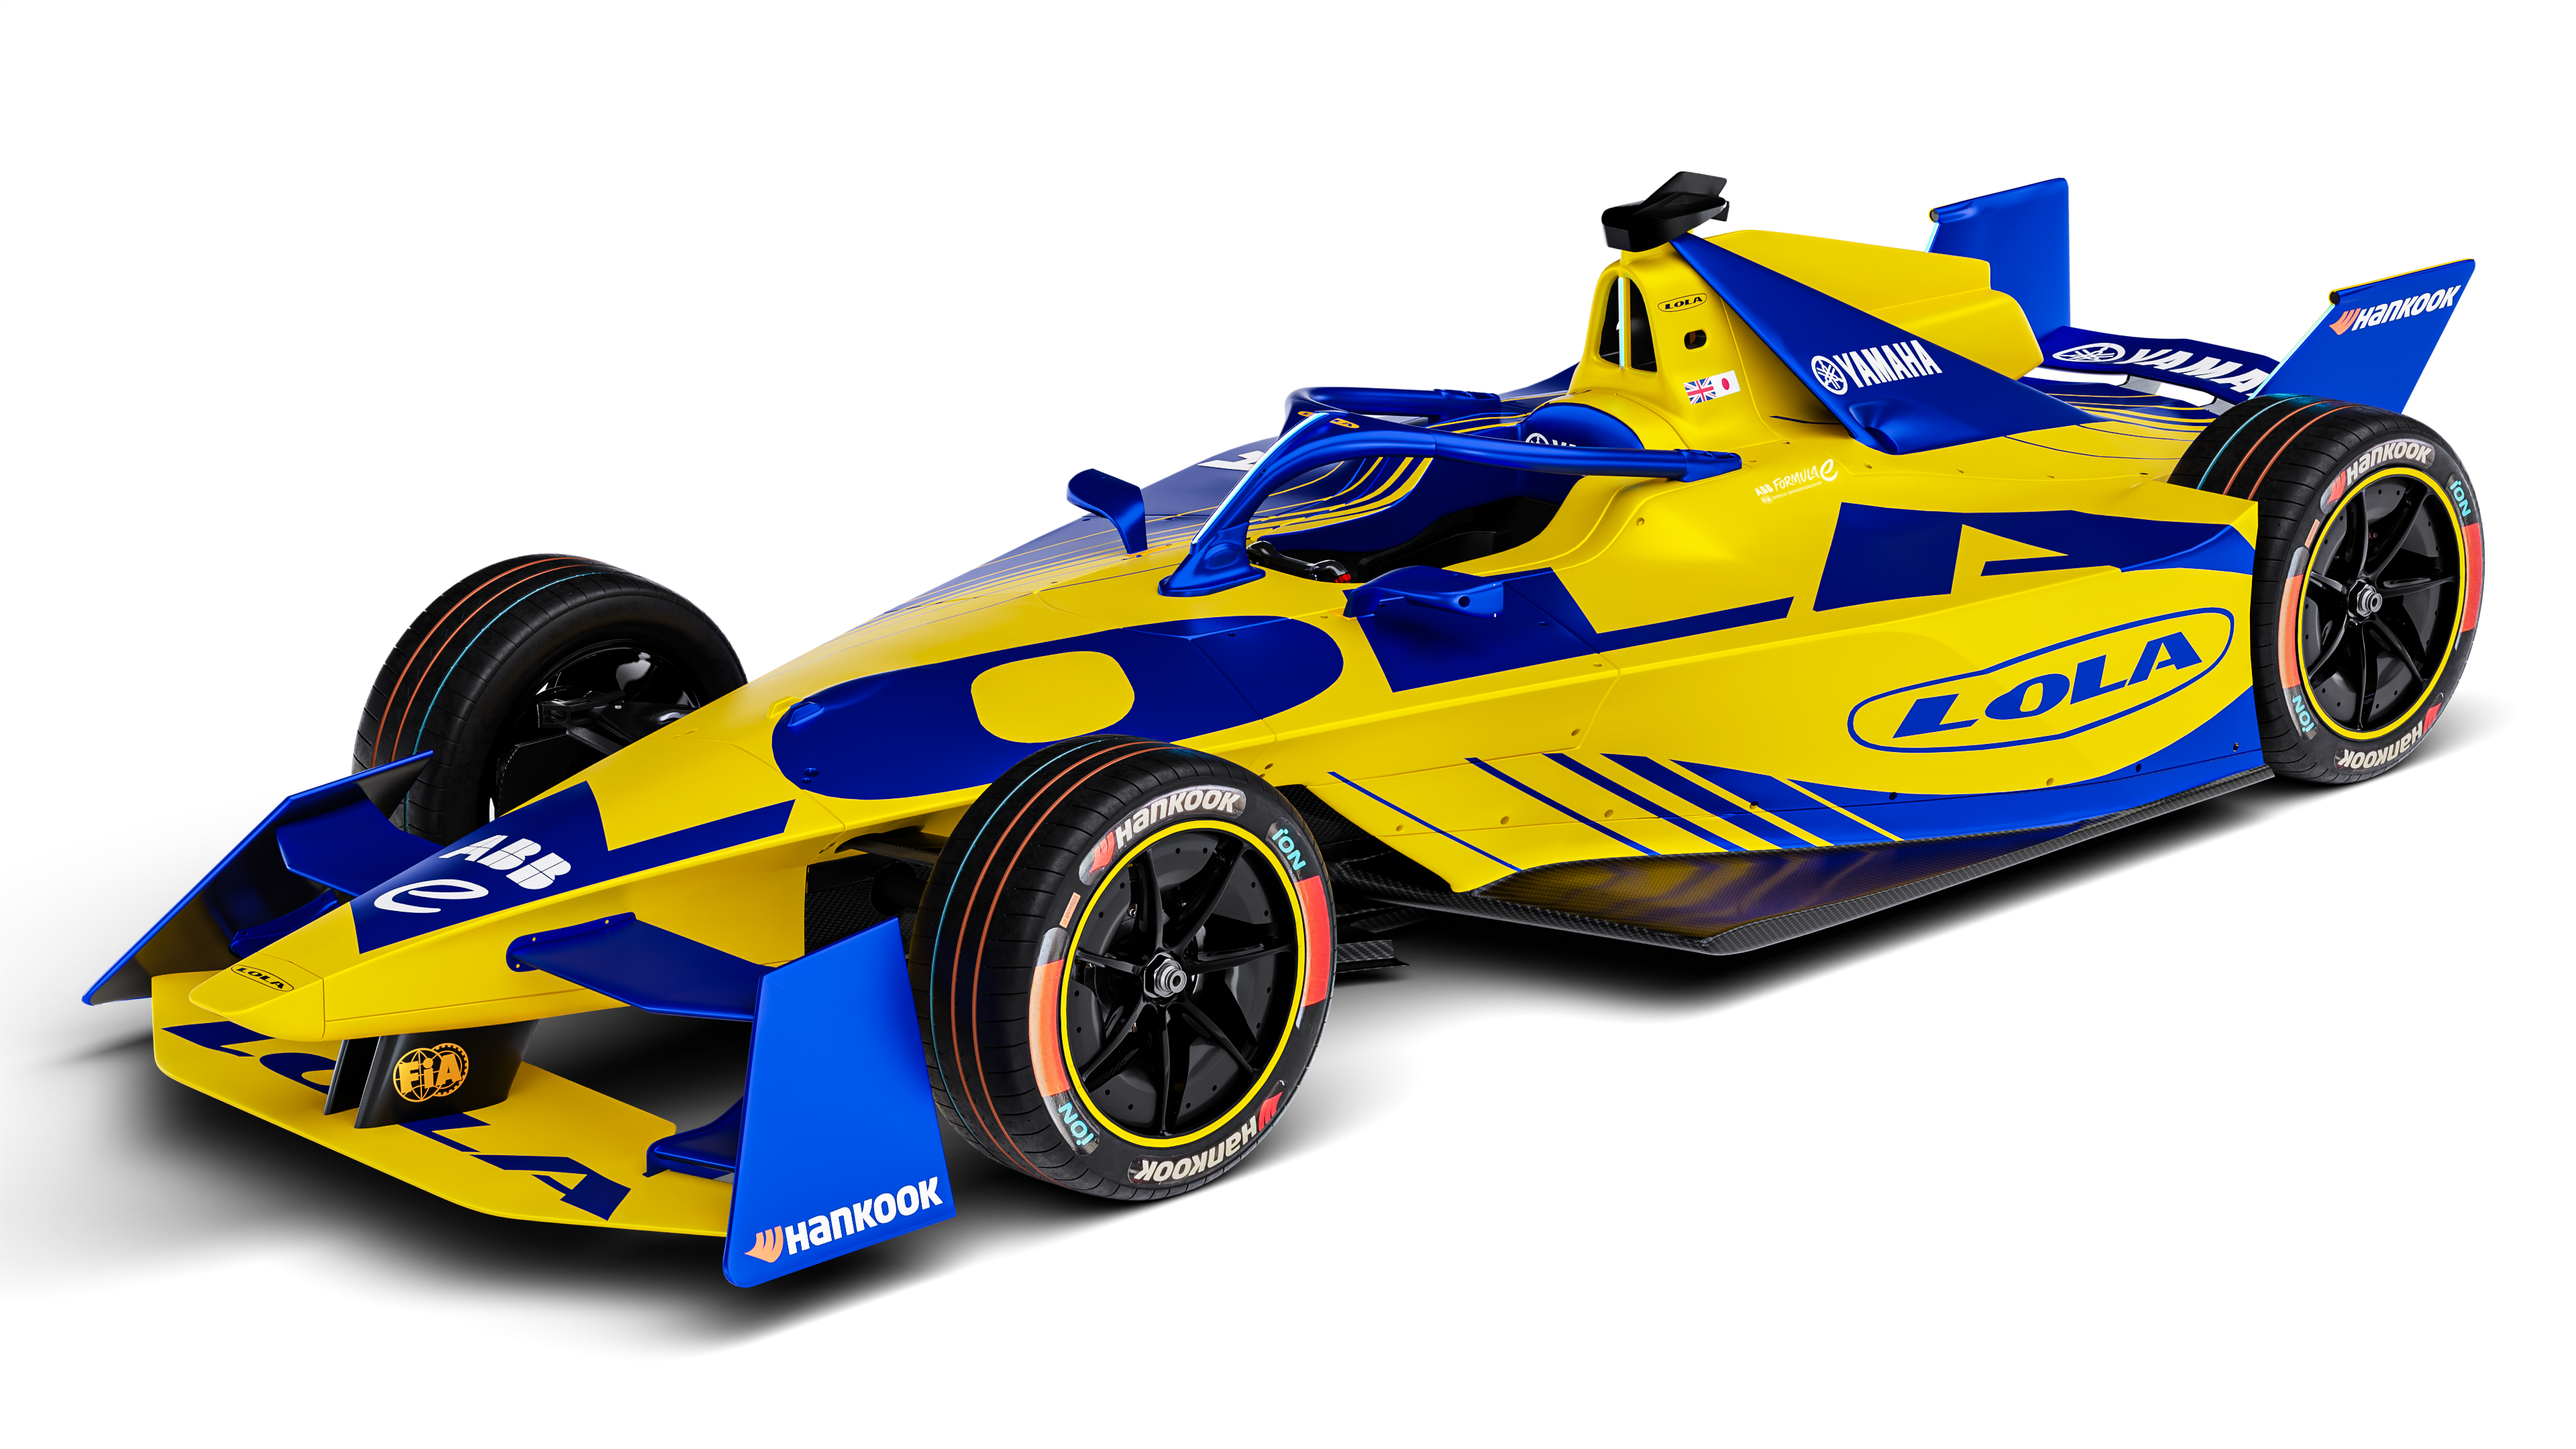 Yamaha and Lola Cars Join Forces in Formula E: Pioneering the Future of Sustainable Racing with High-Performance Electric Powertrains